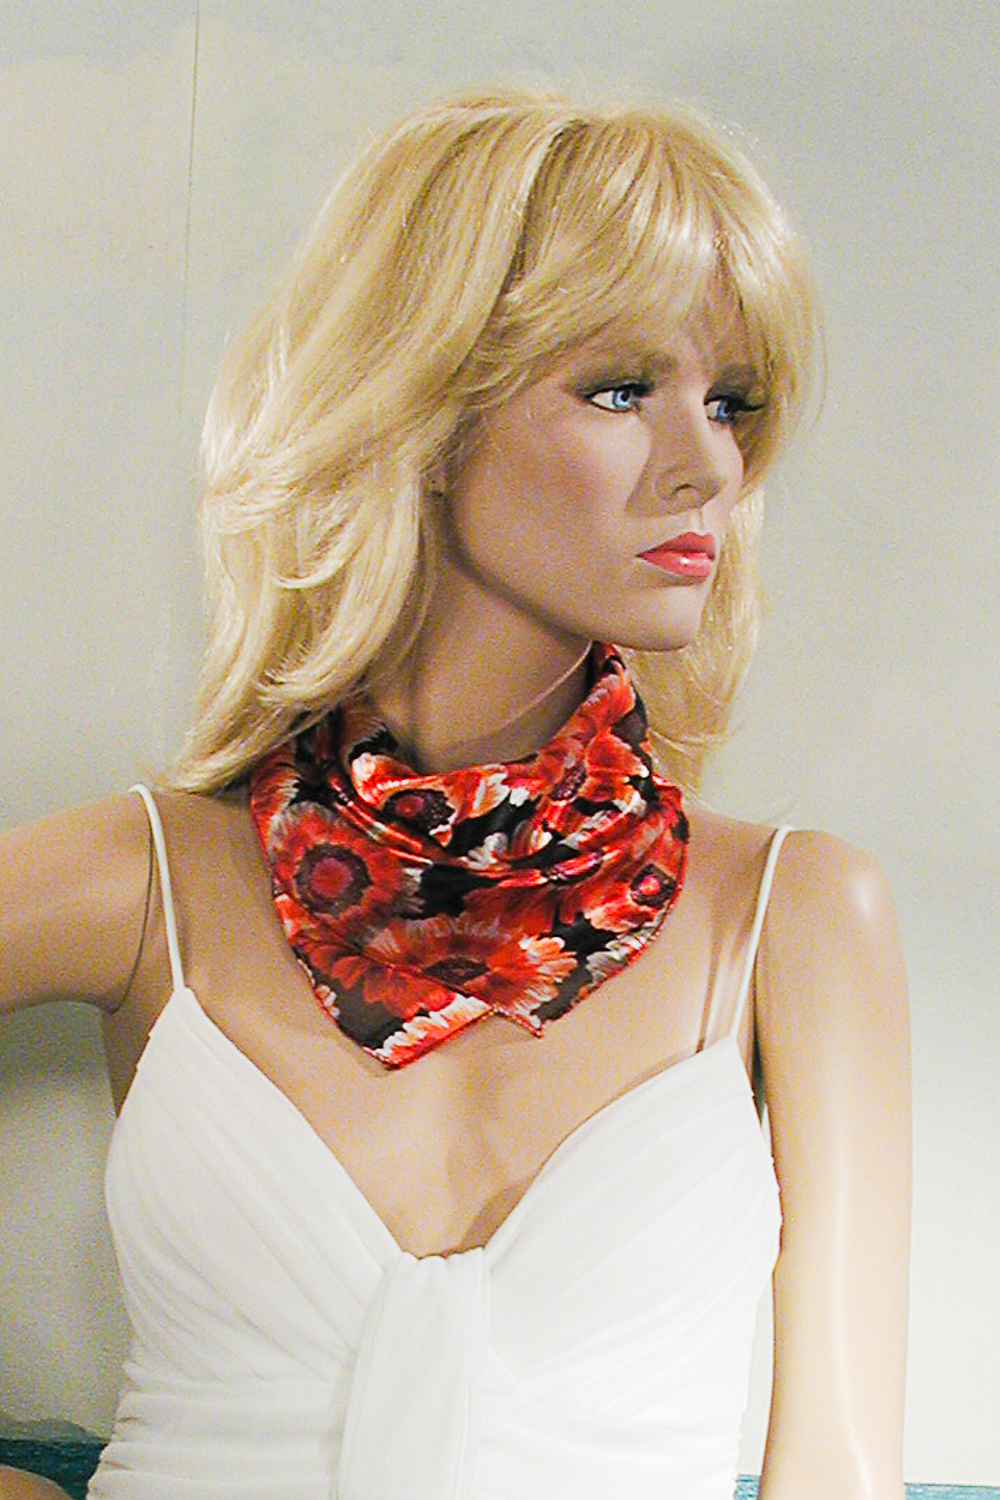 Small Square Neck Scarf with Red Flowers, a fashion accessorie - Evening Elegance